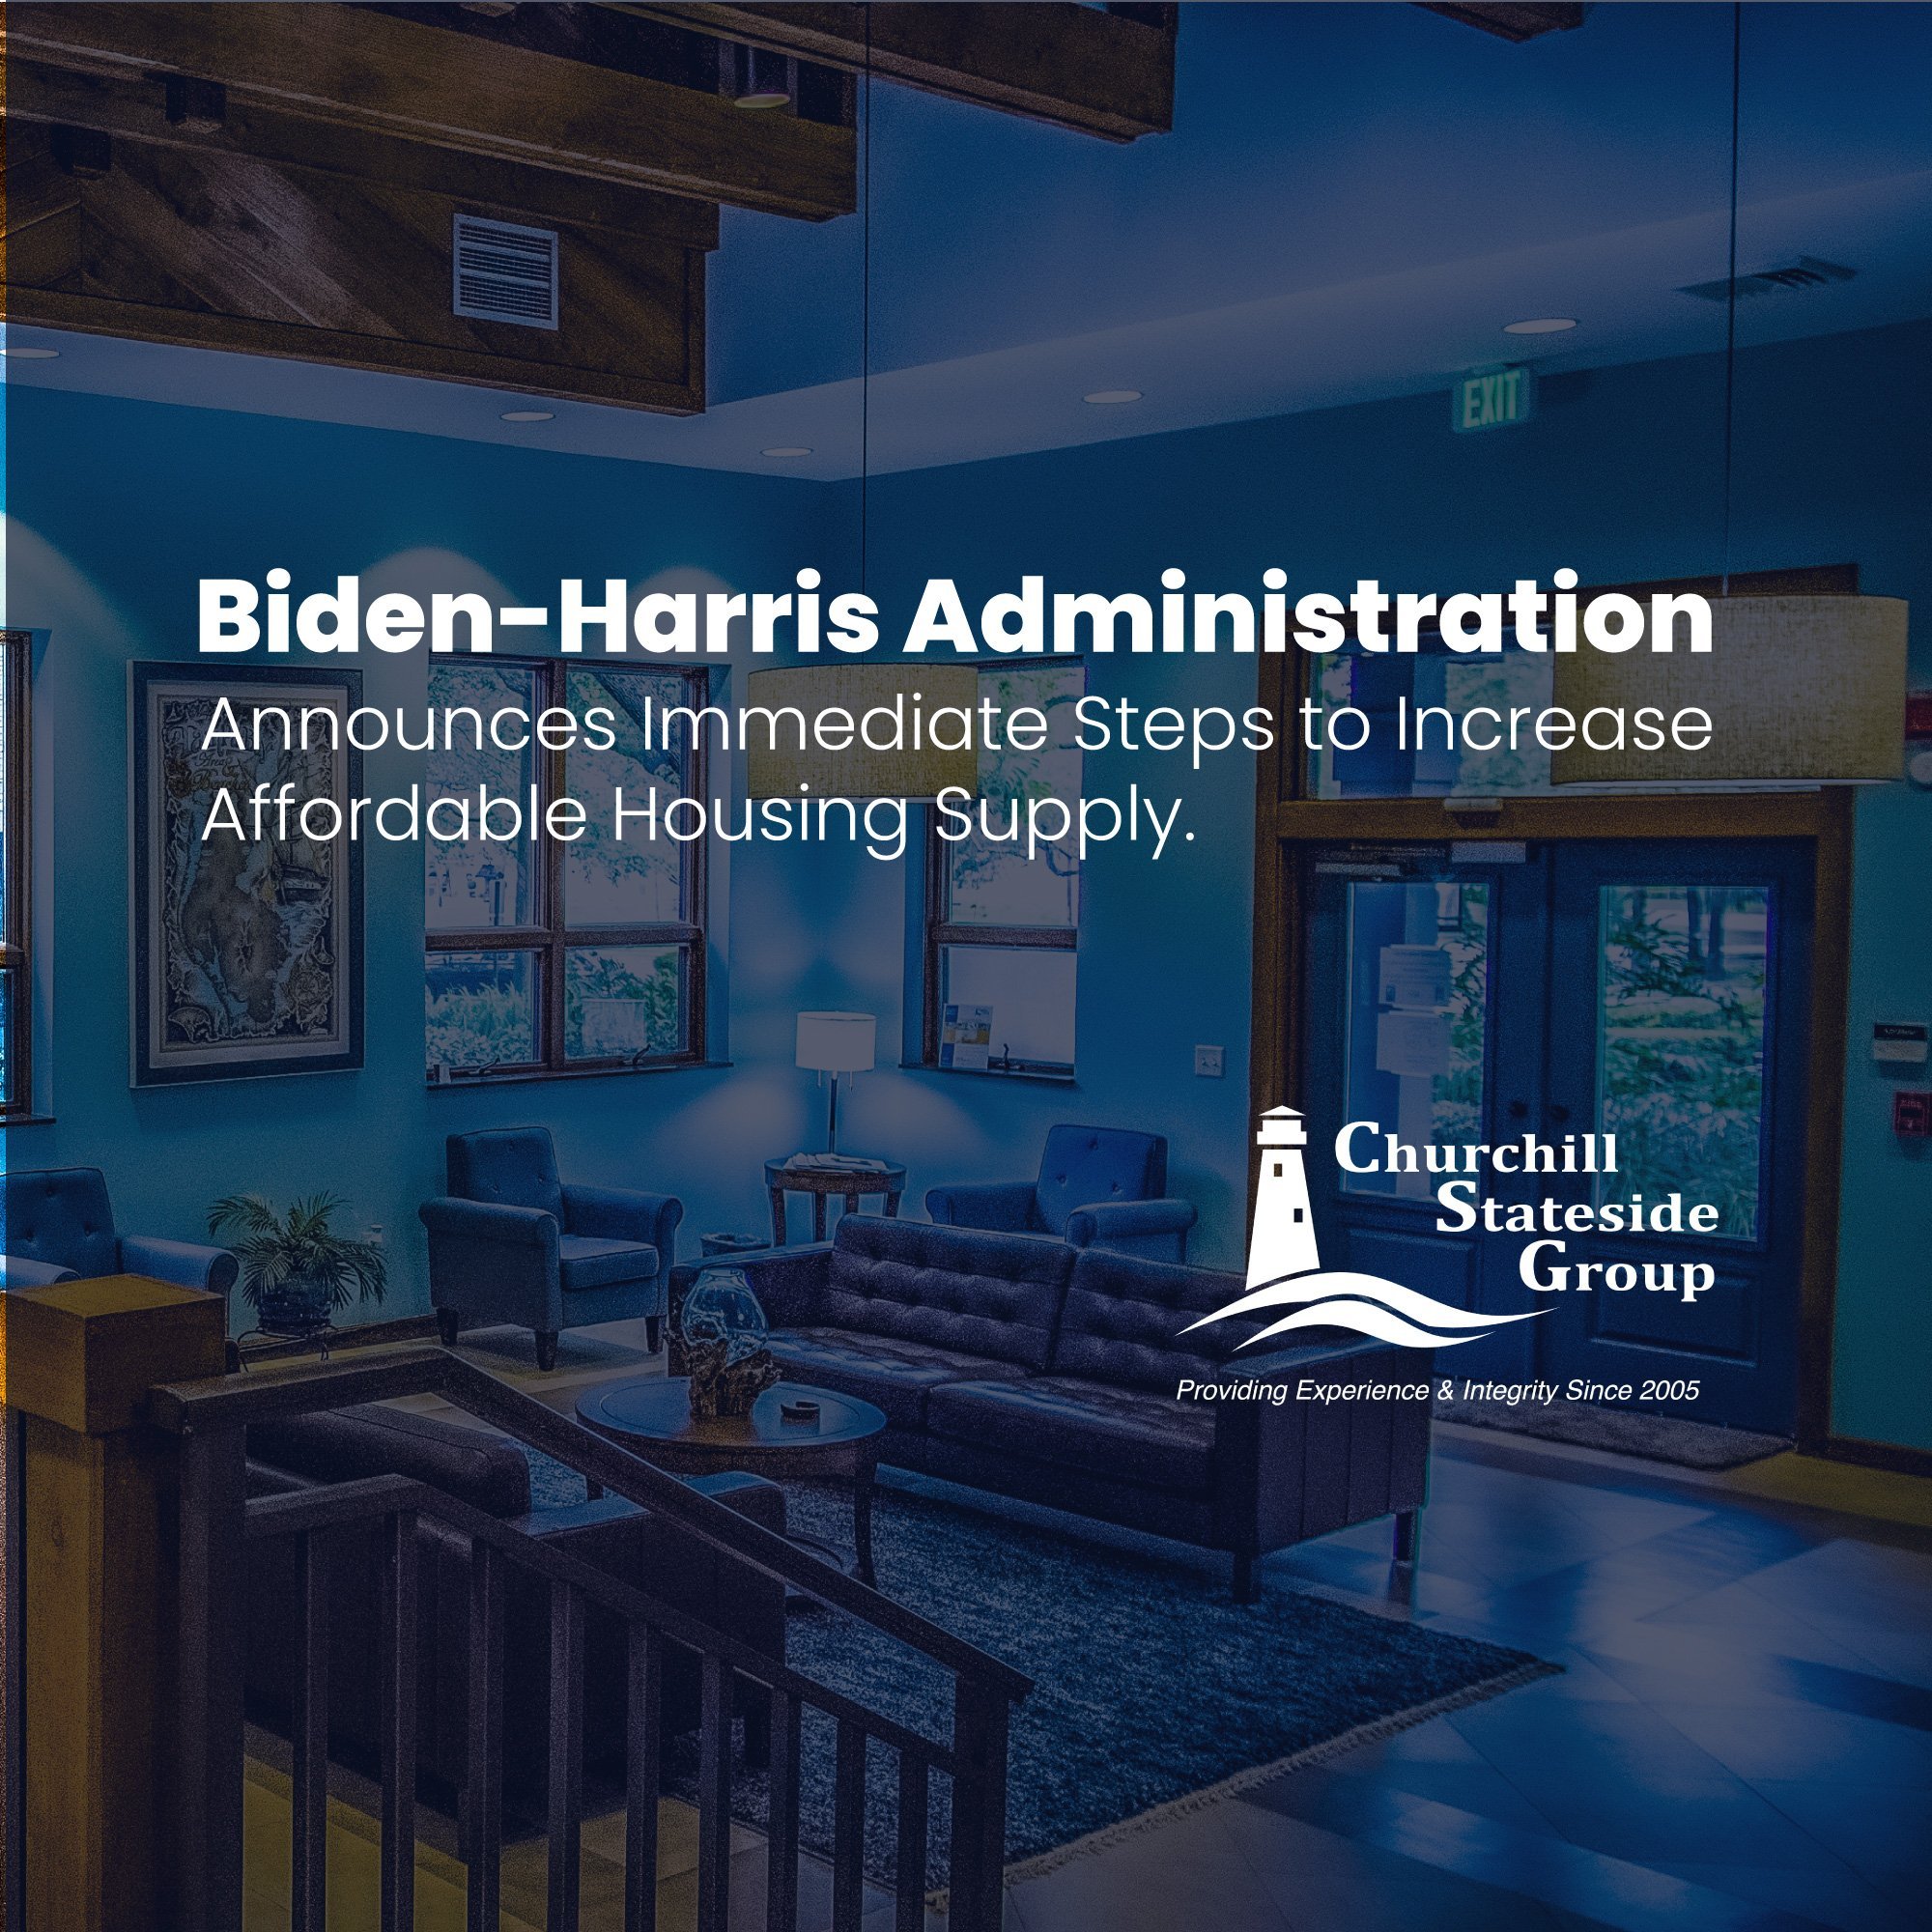 Biden-⁠Harris Administration Announces Immediate Steps to Increase Affordable Housing Supply.